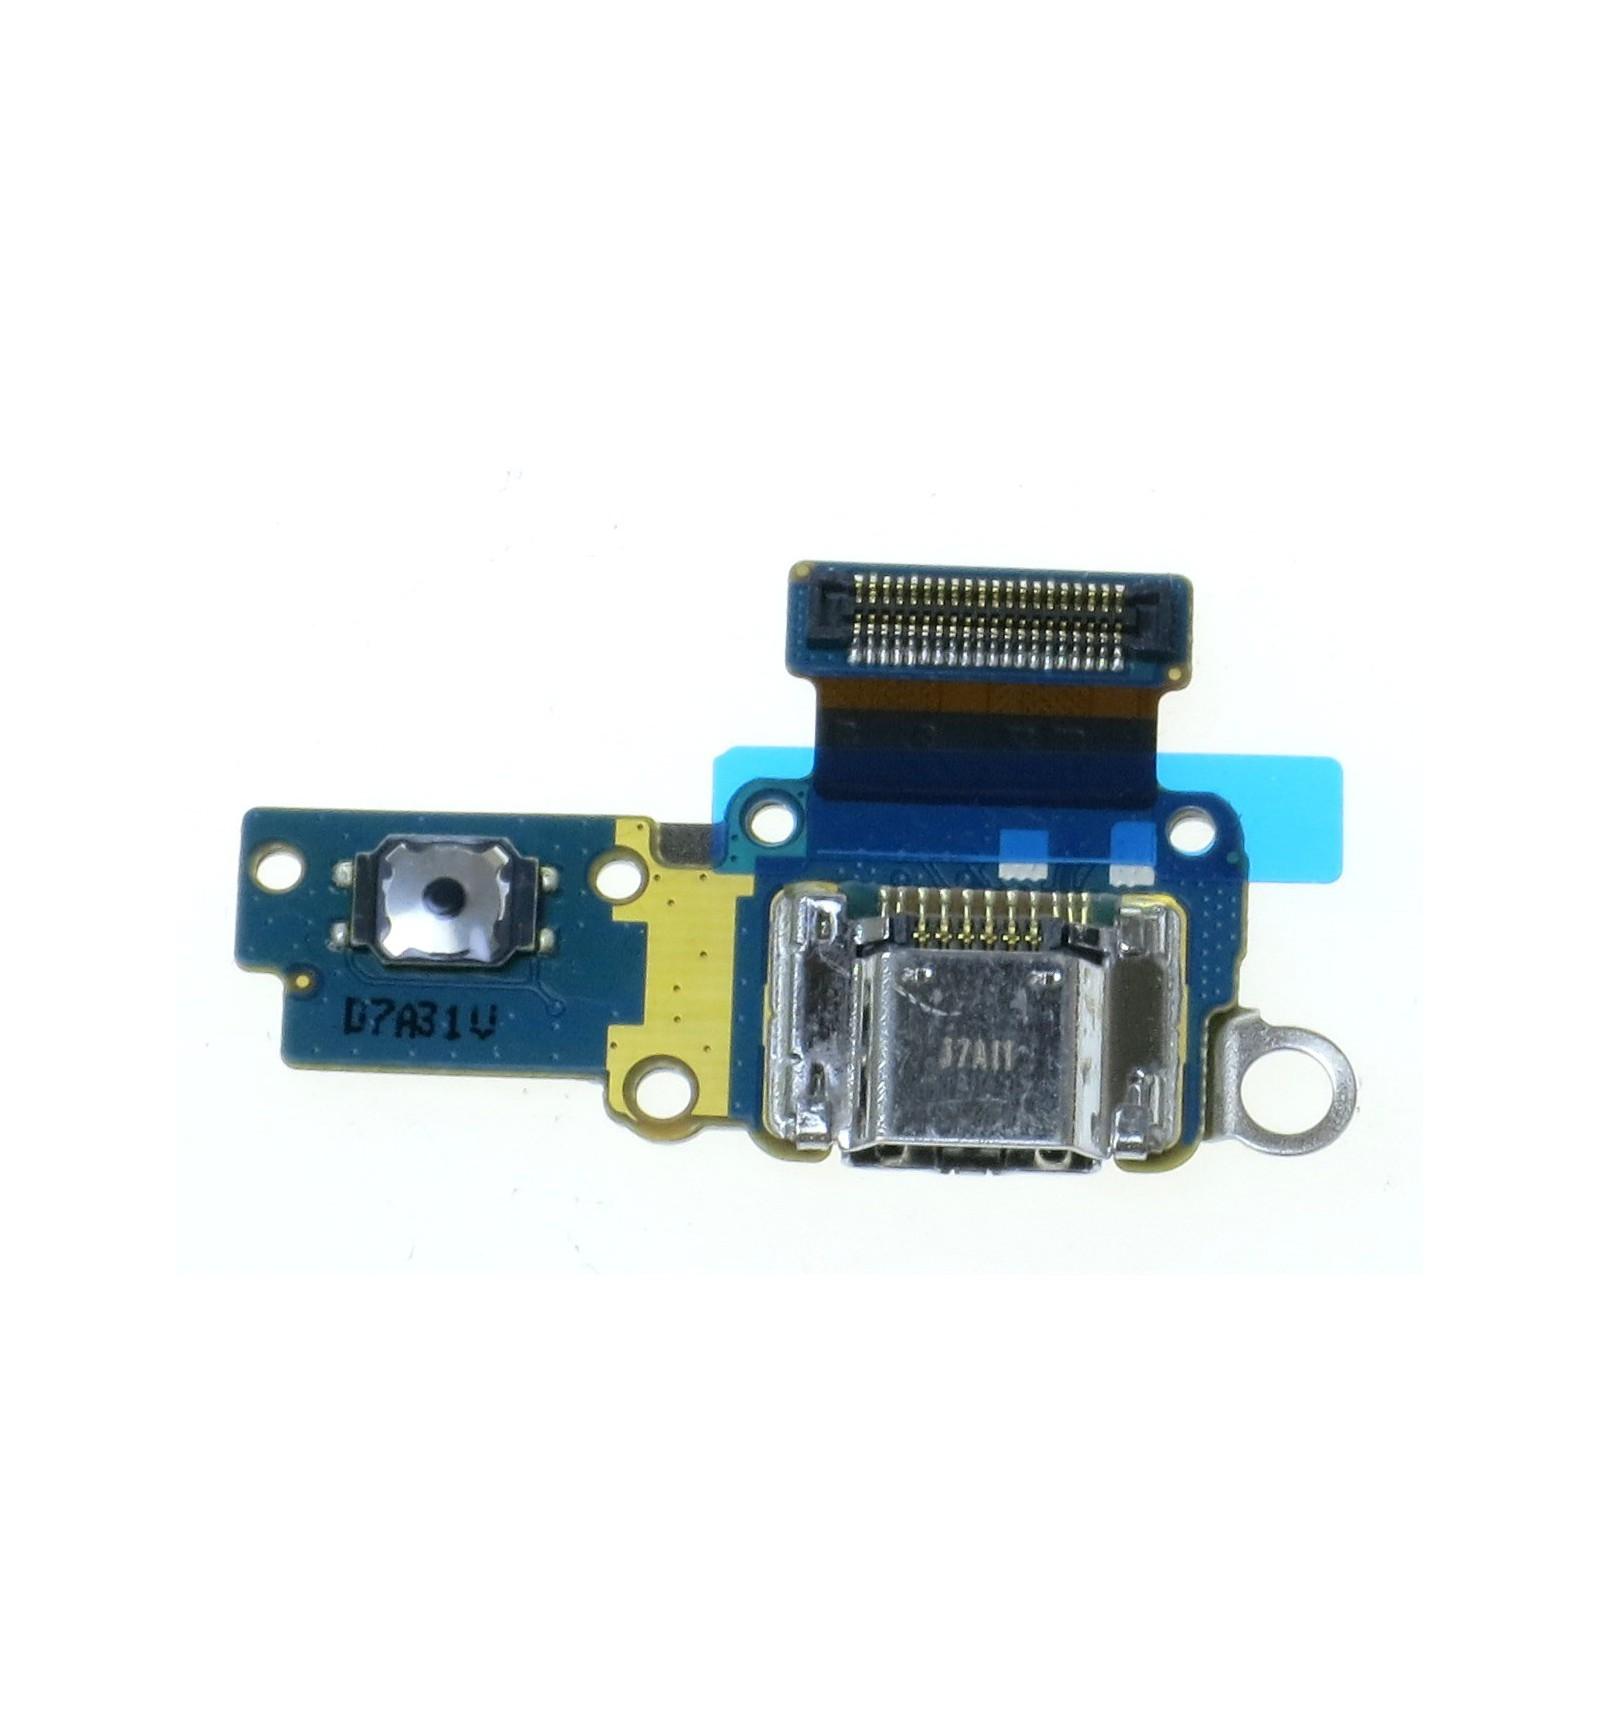 Original Board with USB charger connector Samsung SM-T710 T715 GALAXY TAB S2 8.0